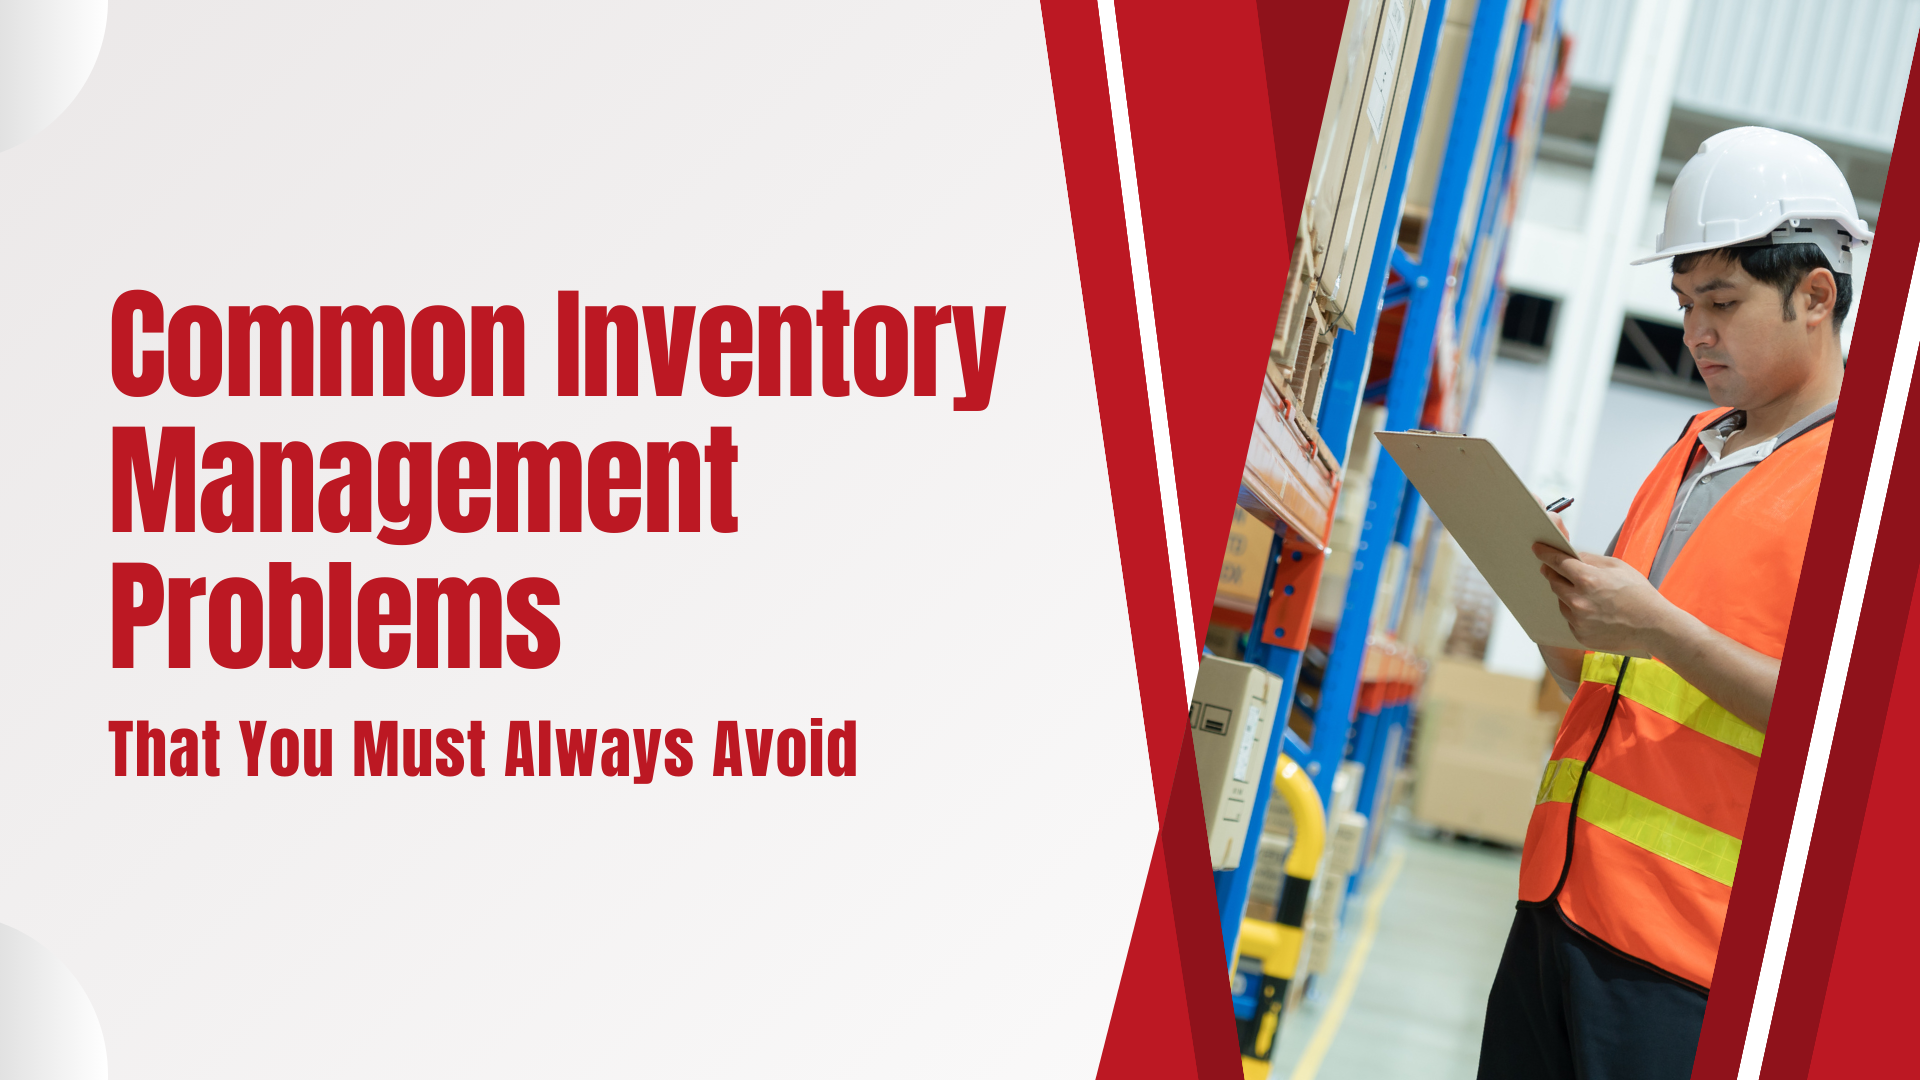 Common Inventory Management Problems That You Must Always Avoid